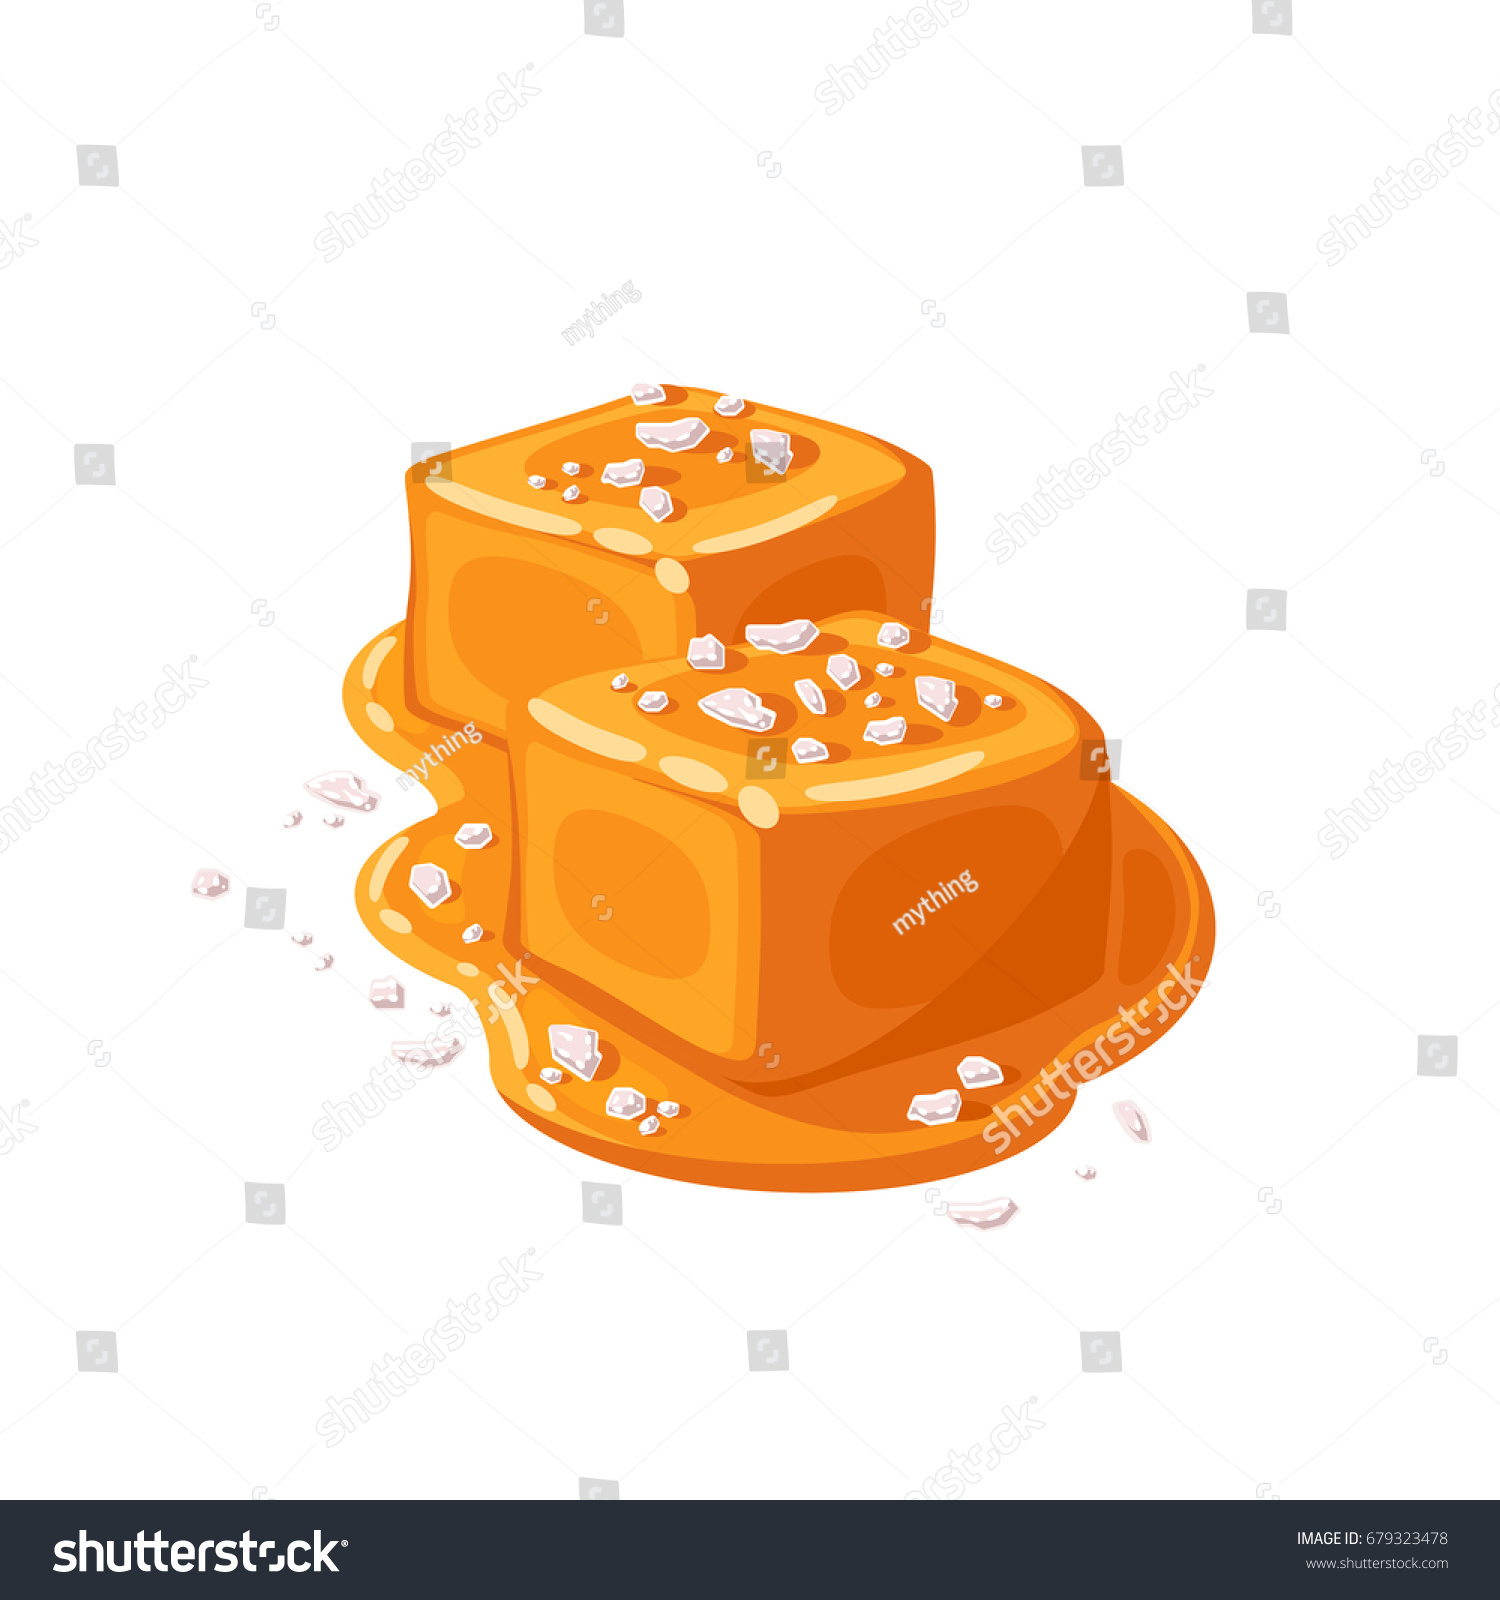 Piece of salted caramel .Vector illustration flat icon isolated on white. #679323478